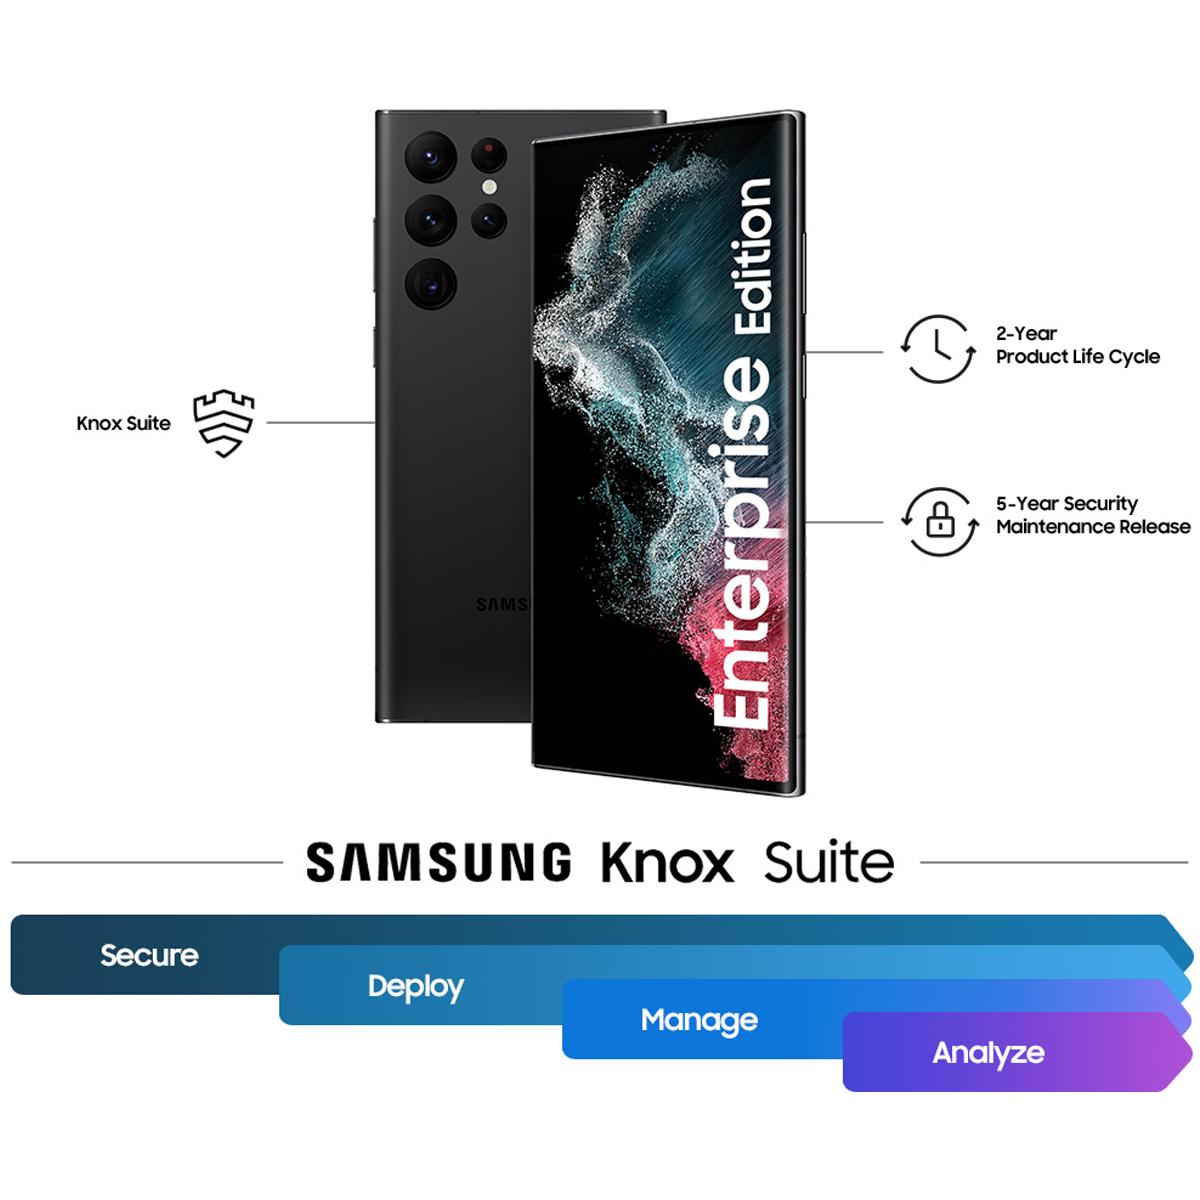 Samsung Knox Suite. 2-year product life cycle. 5 year security maintenance release. Secure, deploy, manage & analyze